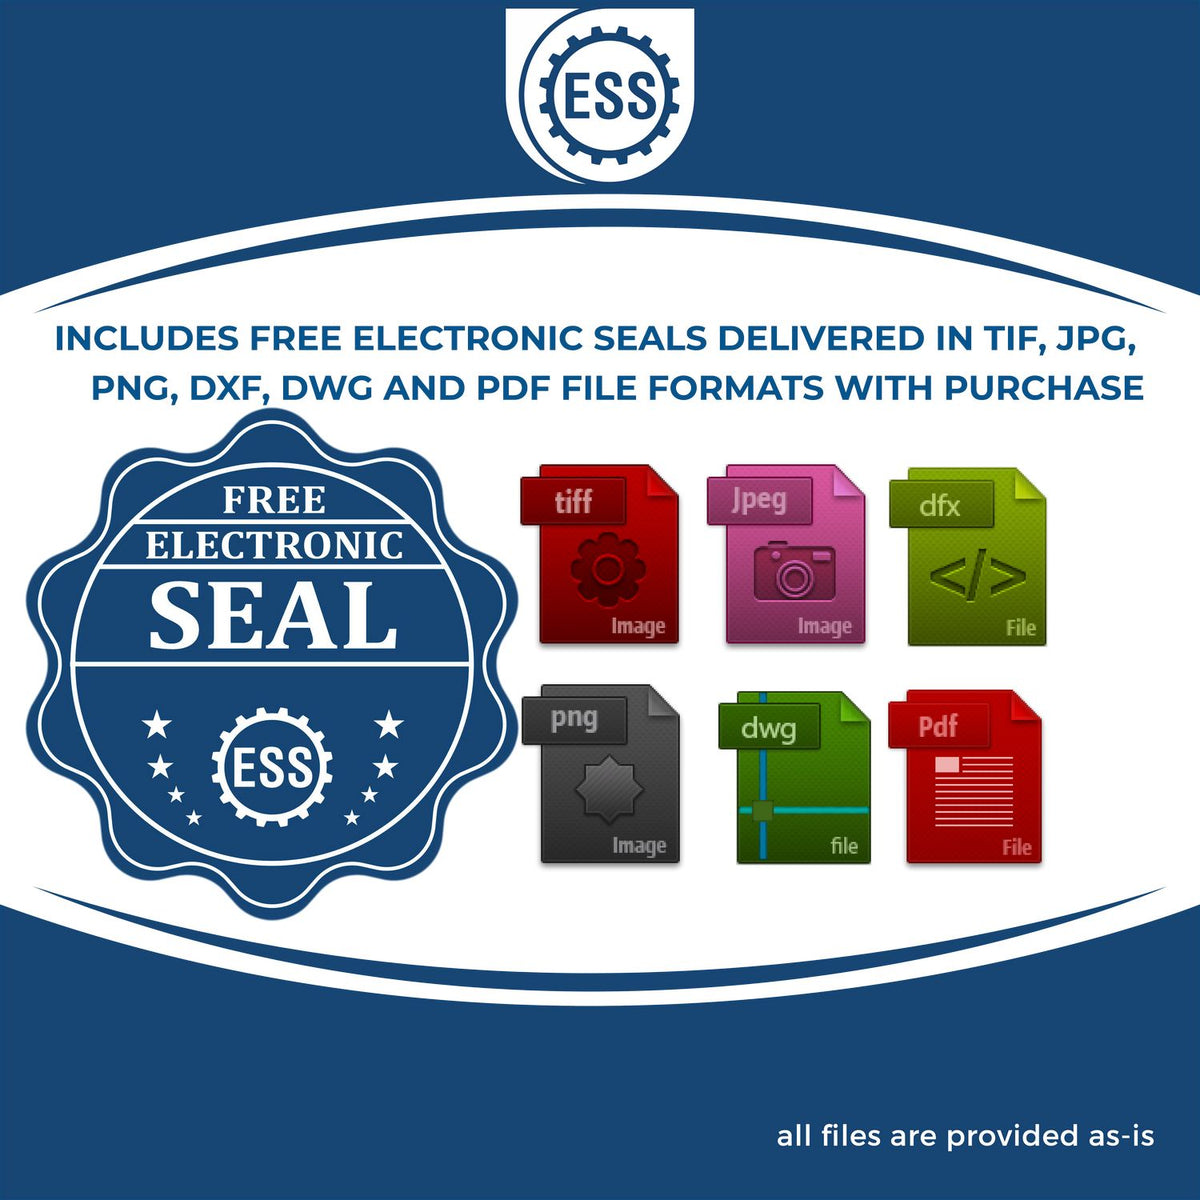 An infographic for the free electronic seal for the Slim Pre-Inked Alaska Land Surveyor Seal Stamp illustrating the different file type icons such as DXF, DWG, TIF, JPG and PNG.